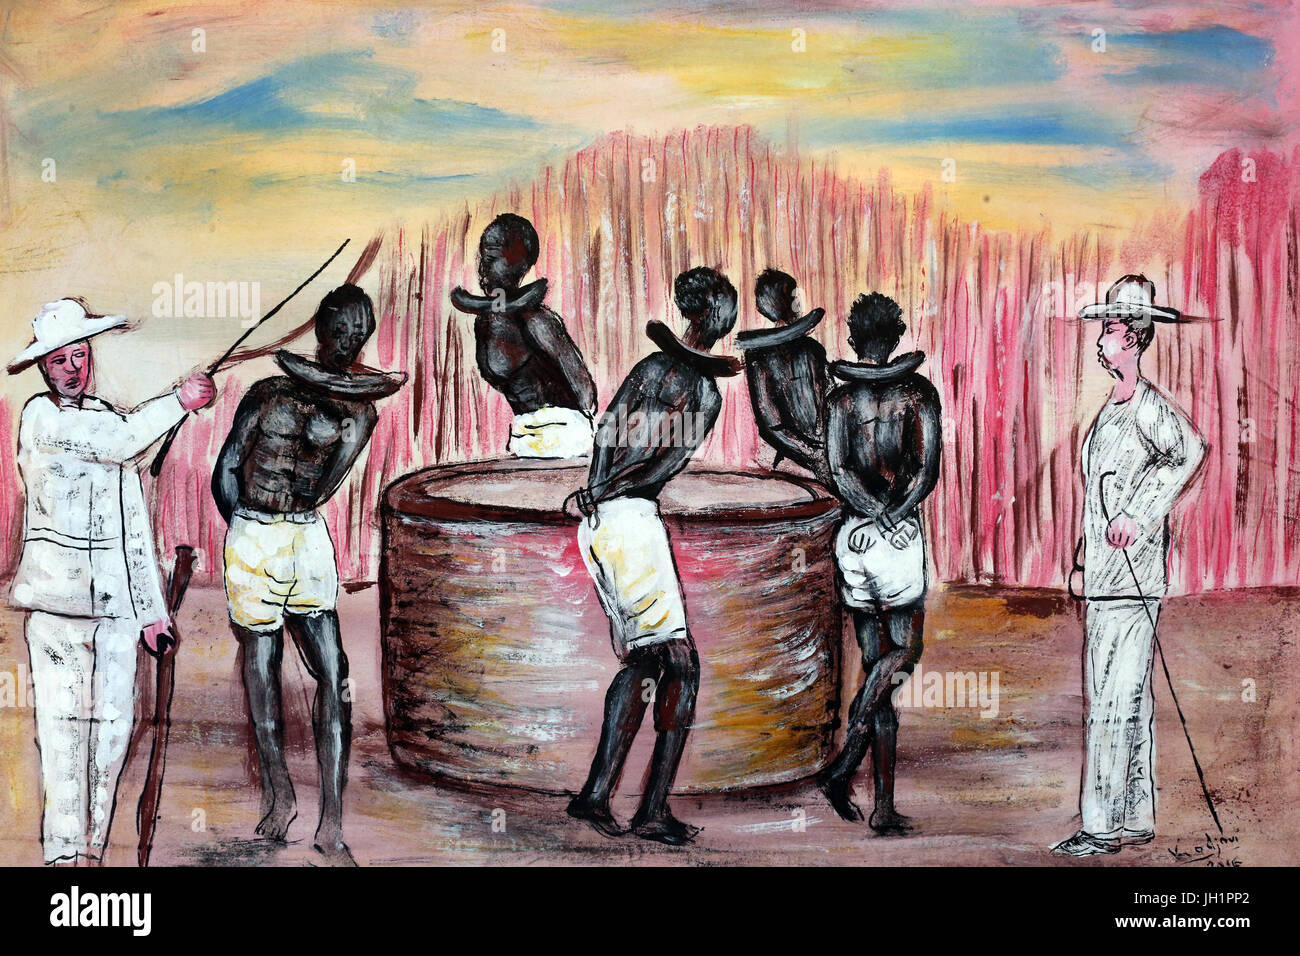 Agbodrafo. La Maison des Esclaves (House of Slaves). Painting.    Togo. Stock Photo